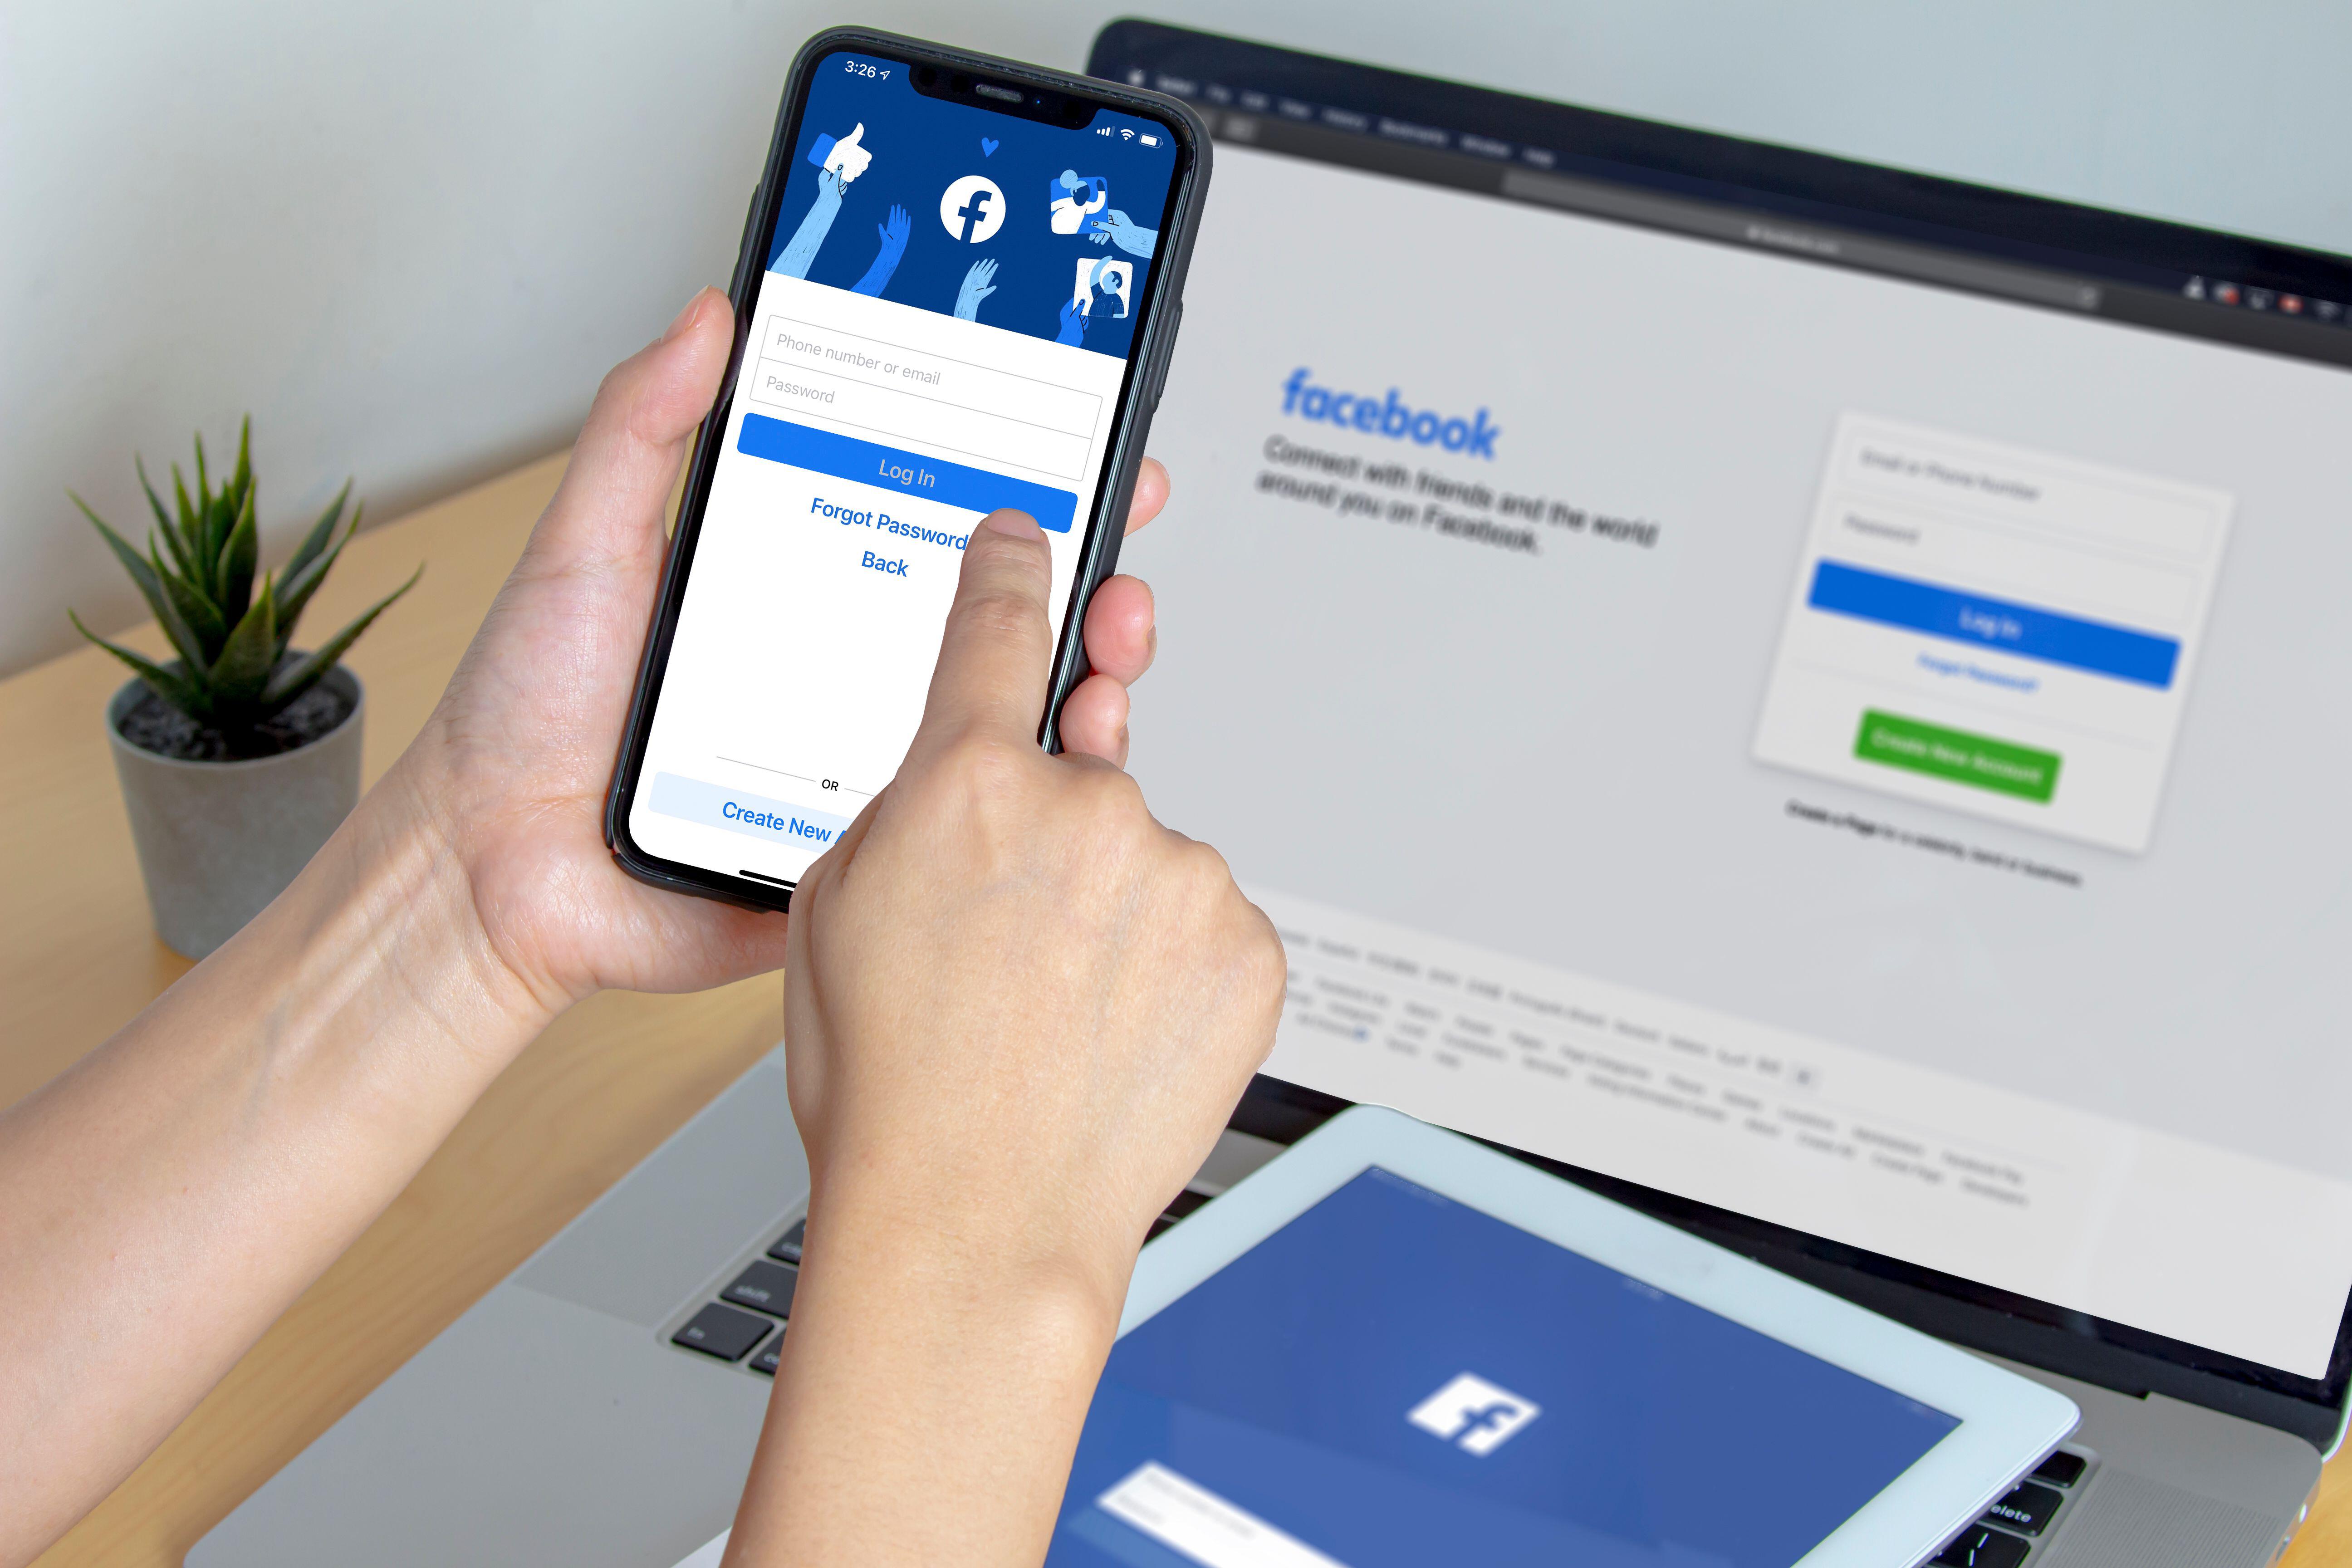 Facebook users are warned about infostealer pages that can infiltrate their devices